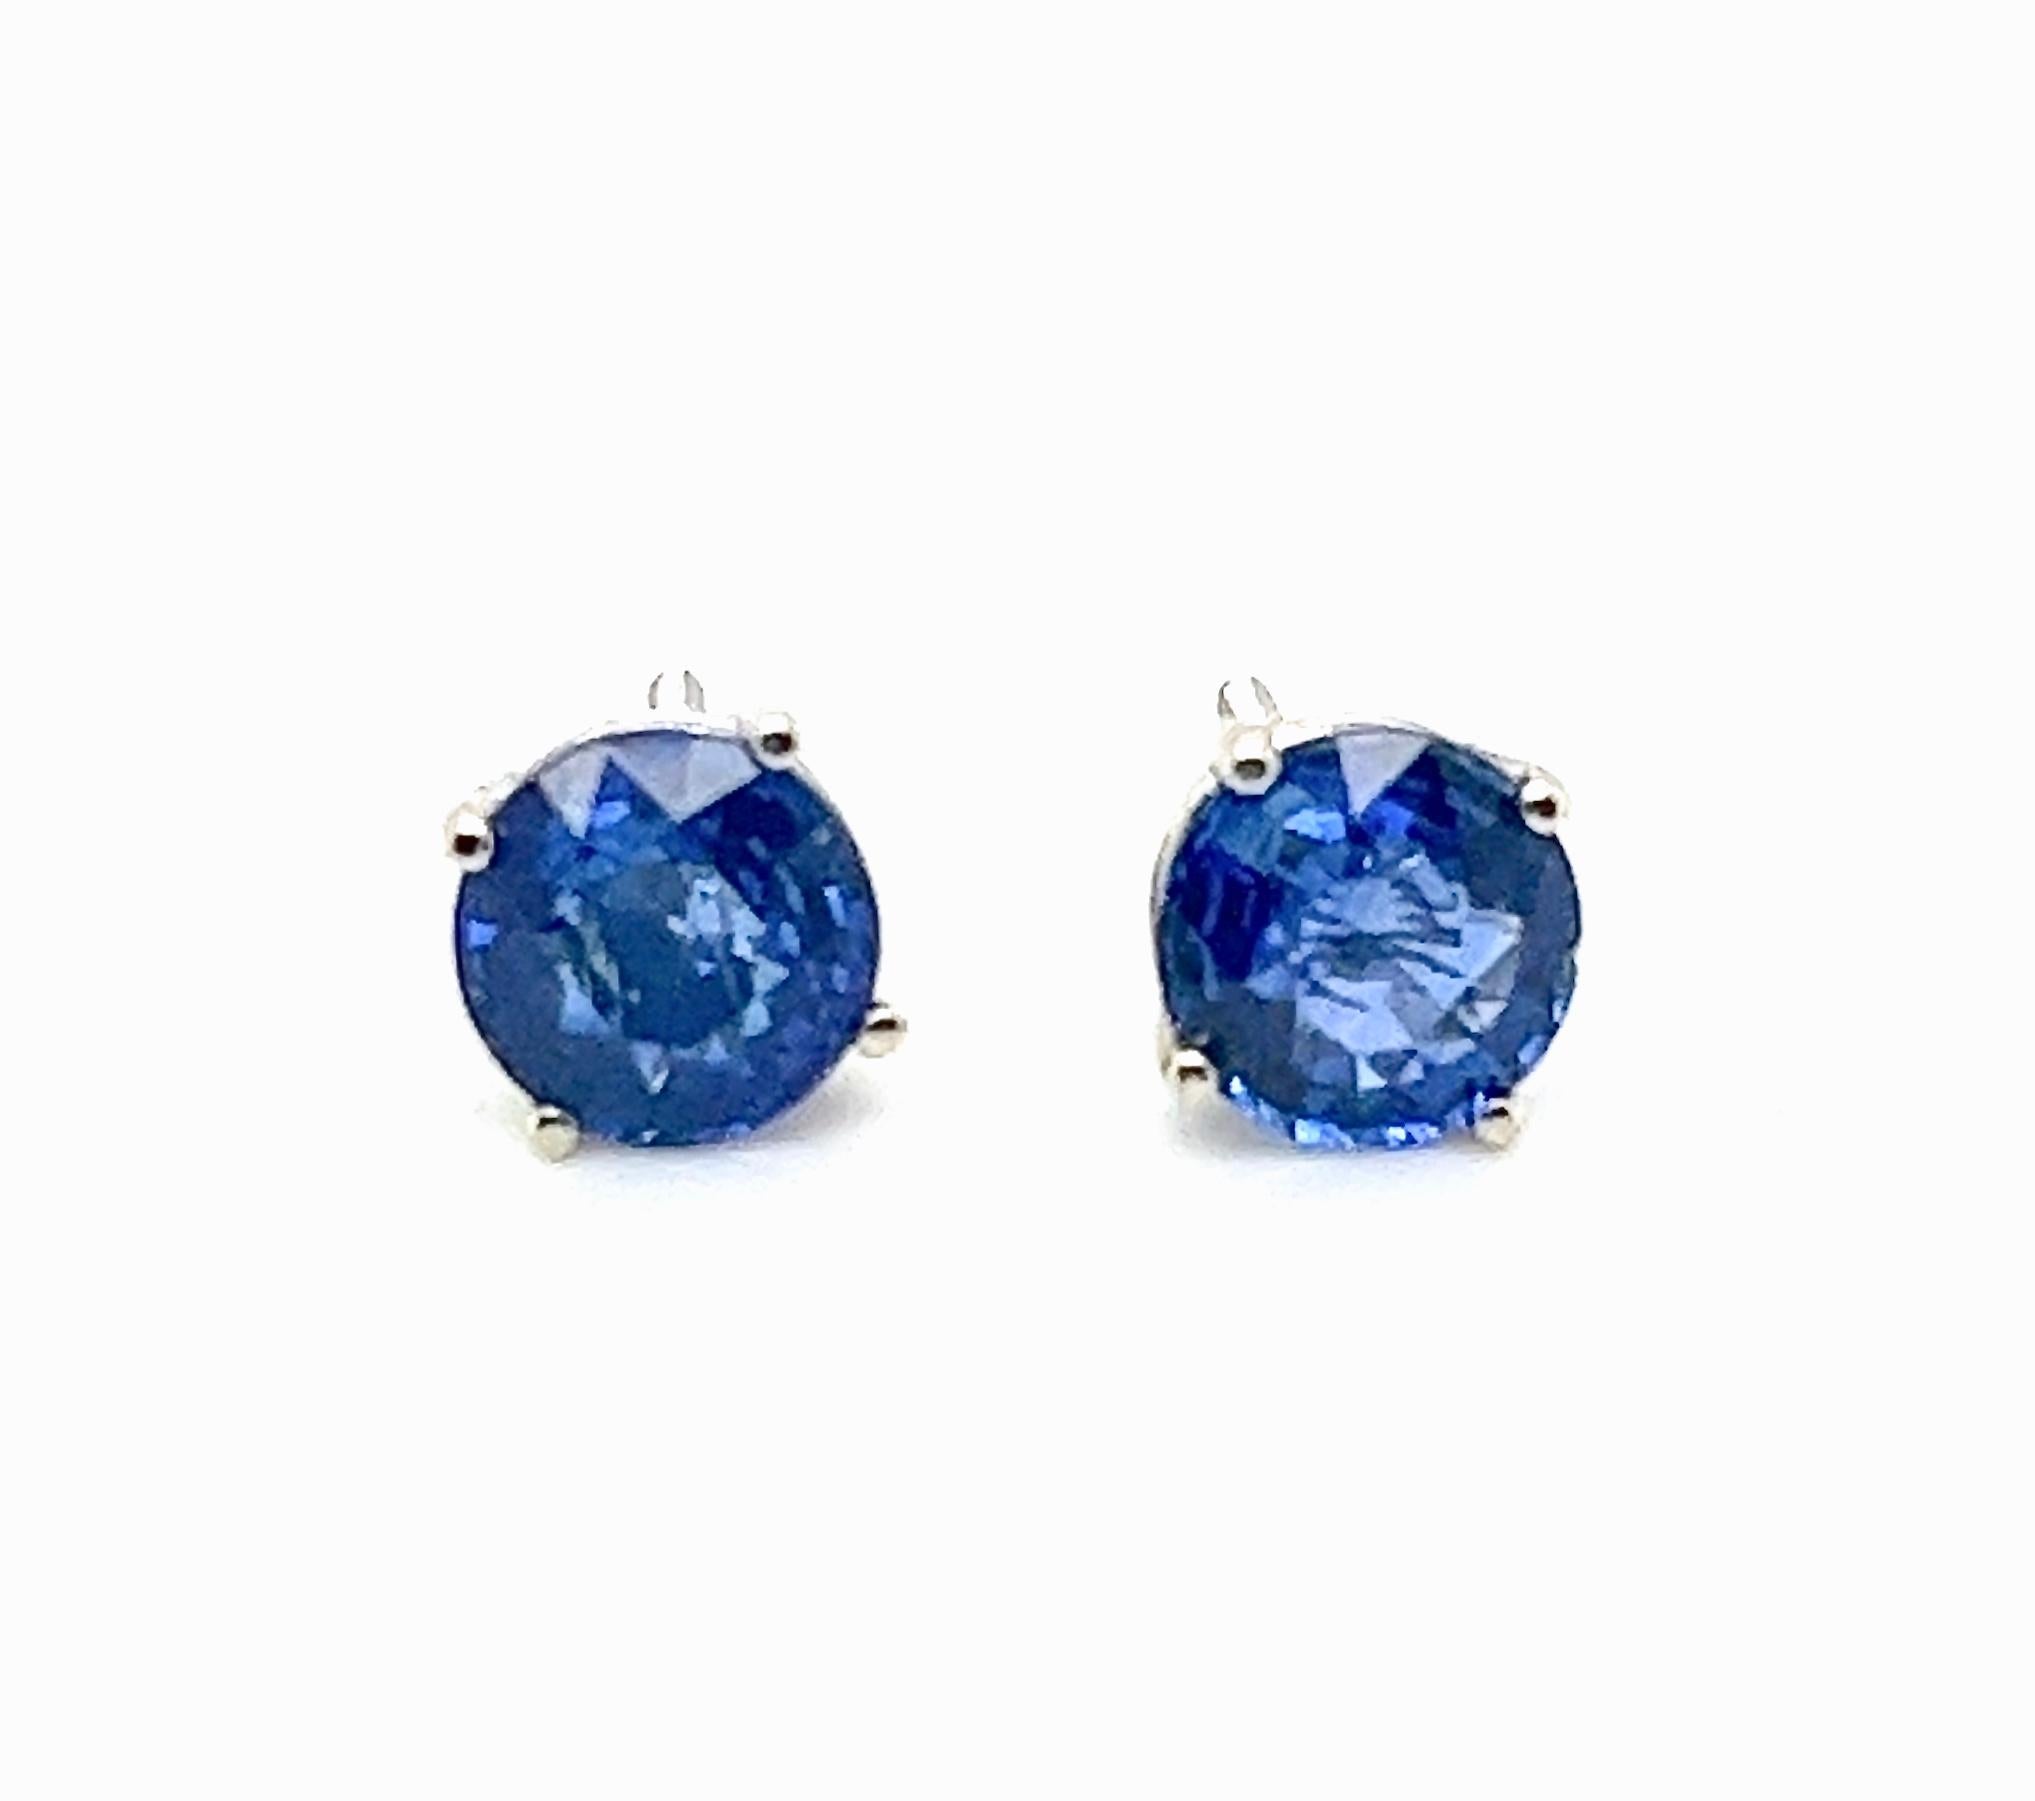 Indulge in the classic elegance of this natural earth mined Blue Sapphire pair, weighing a total of 2.03 carats, with an exquisite blue hue and tone that's sure to turn heads. Set within a simple yet sophisticated 4 prong white 14kt gold basket,